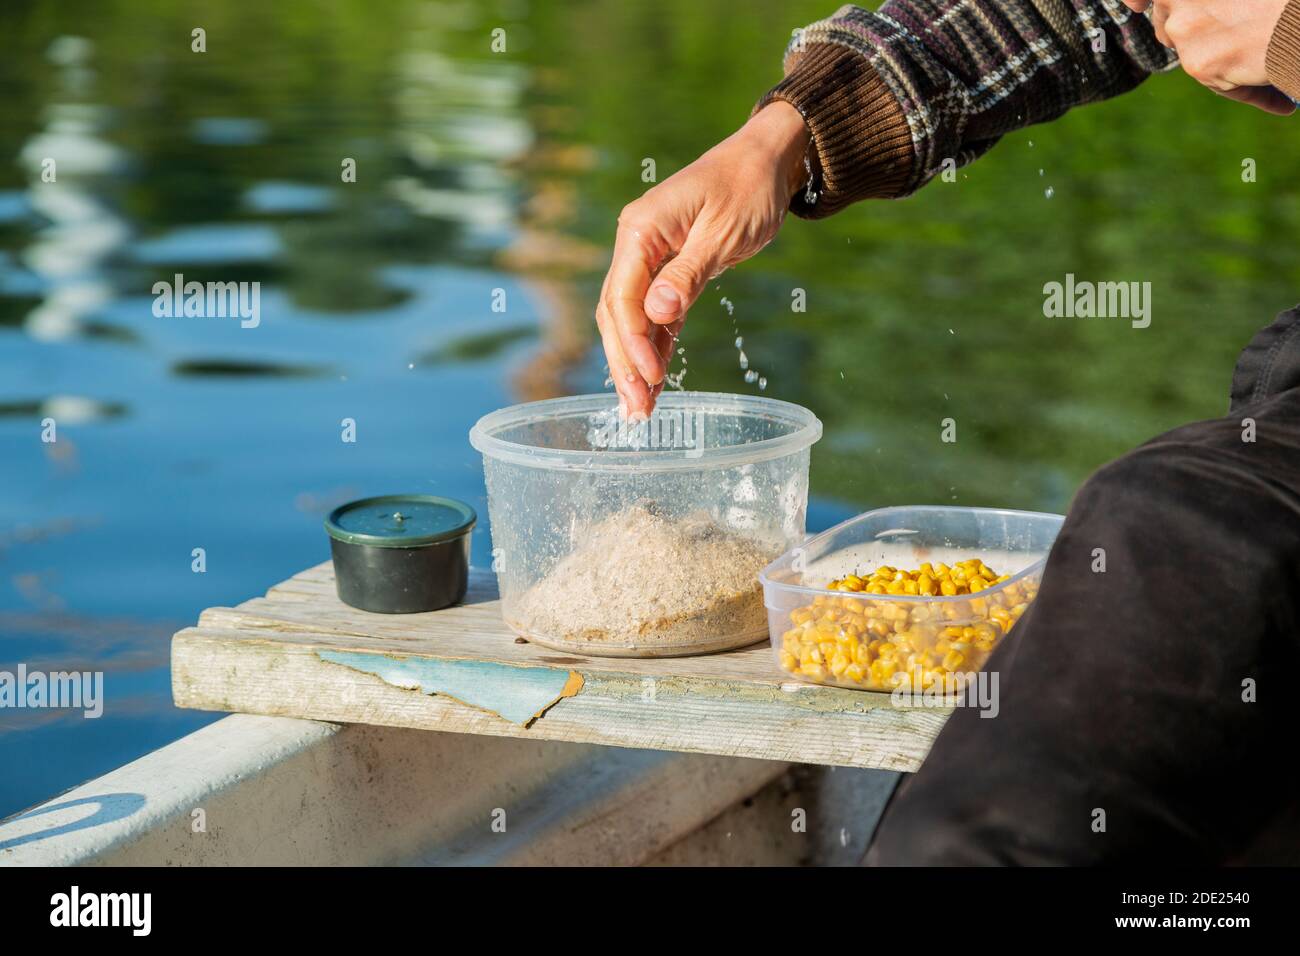 Hands making food for fish feeding and fishing chum. Man is adding